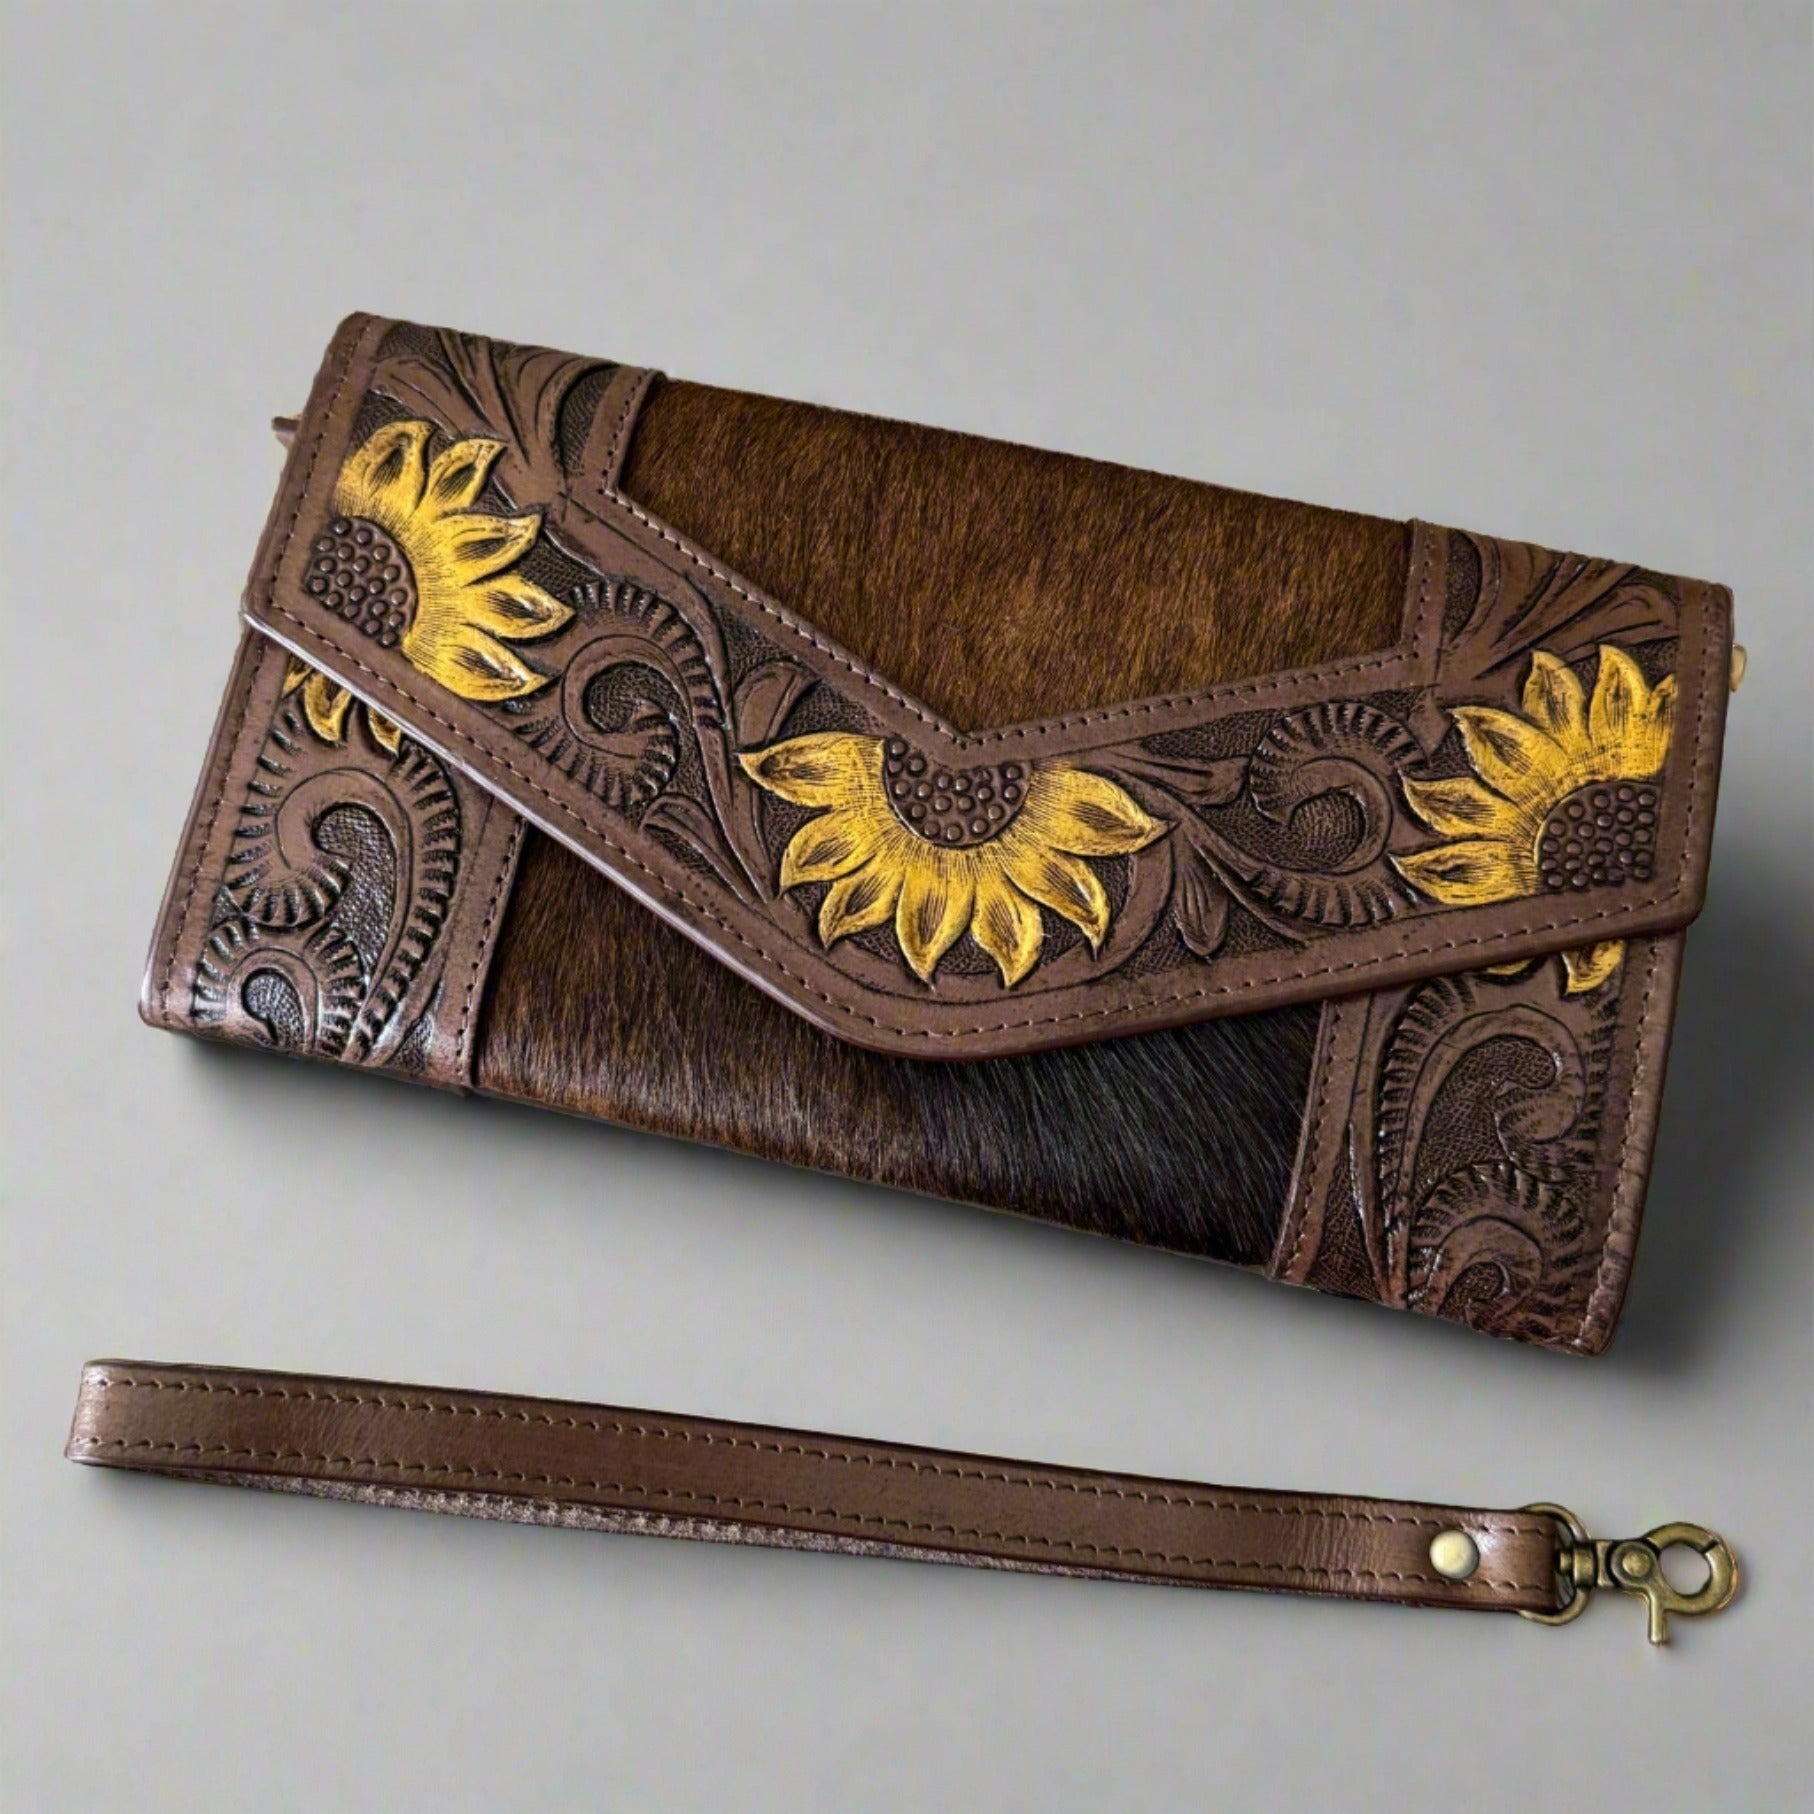 Sunflower Hand-Tooled Leather Clutch Wallet